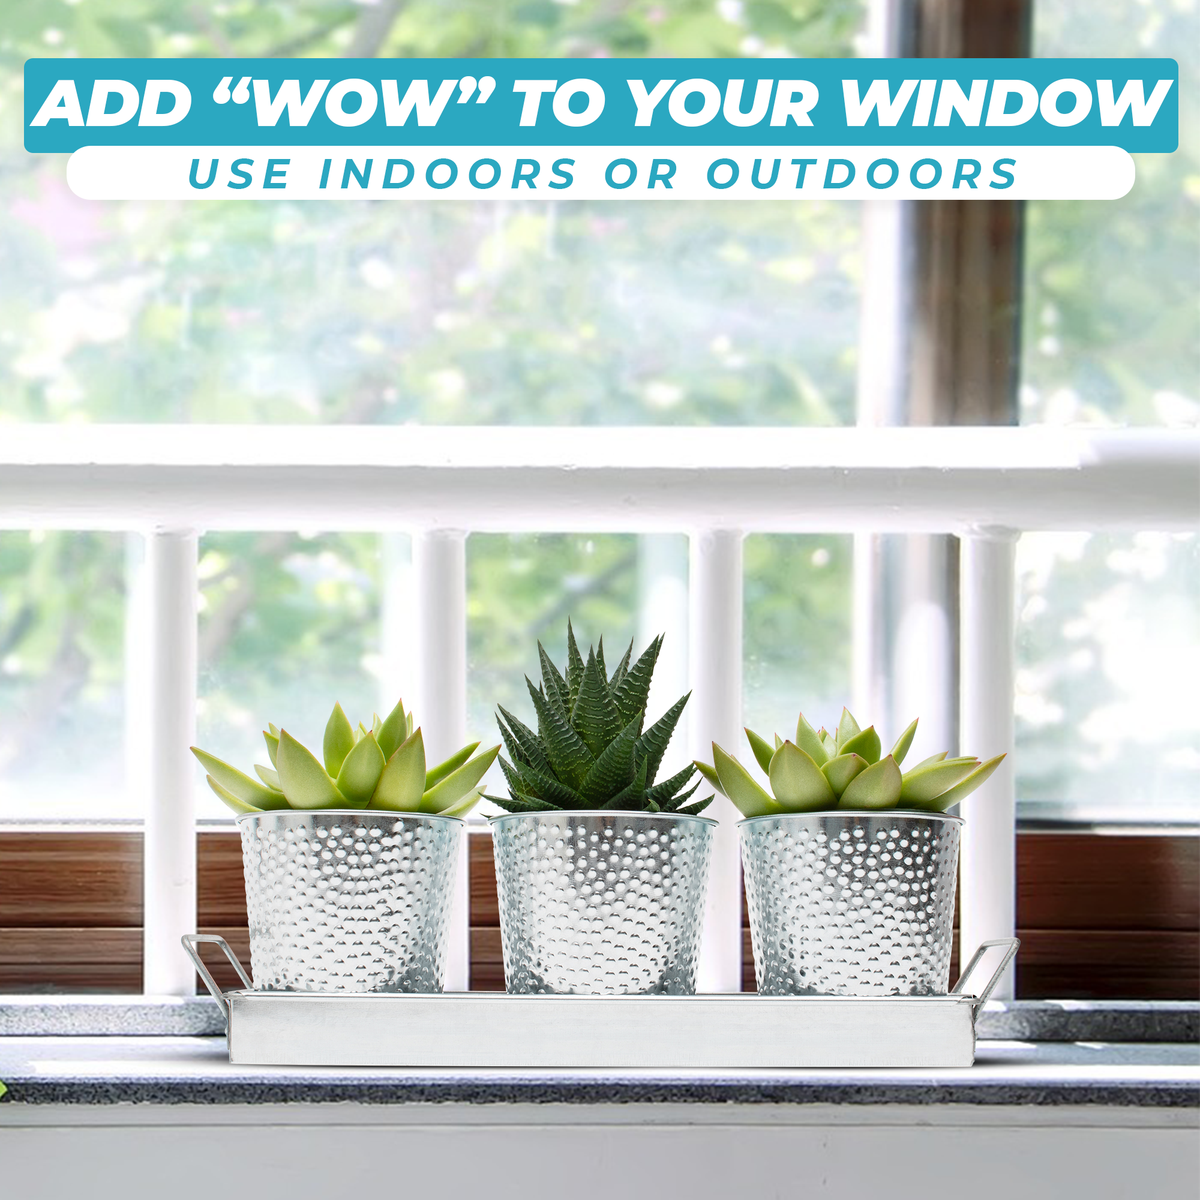 Herb pots with tray set on a window sill for indoor or outdoor use